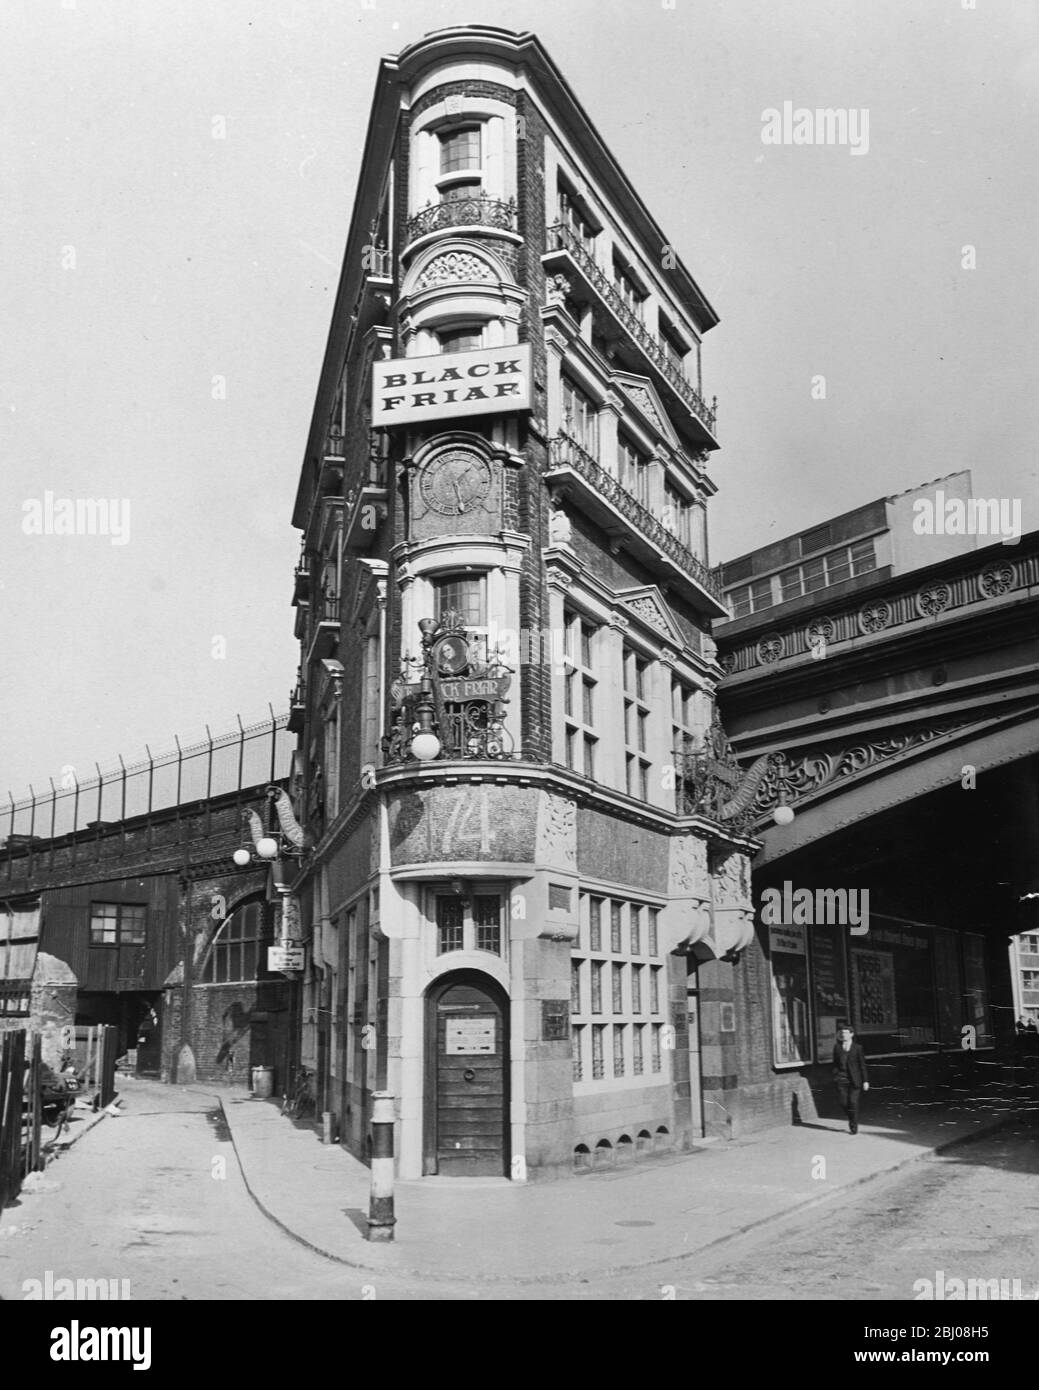 London's flat-iron building - The Black Friar pub at the junction of Queen Victoria Street and New Bridge Street. Built in 1870 it is under threat from development proposed for 1967 (it was saved from demolition by a campaign led by Sir John Betjeman). - 24 March 1966 Stock Photo